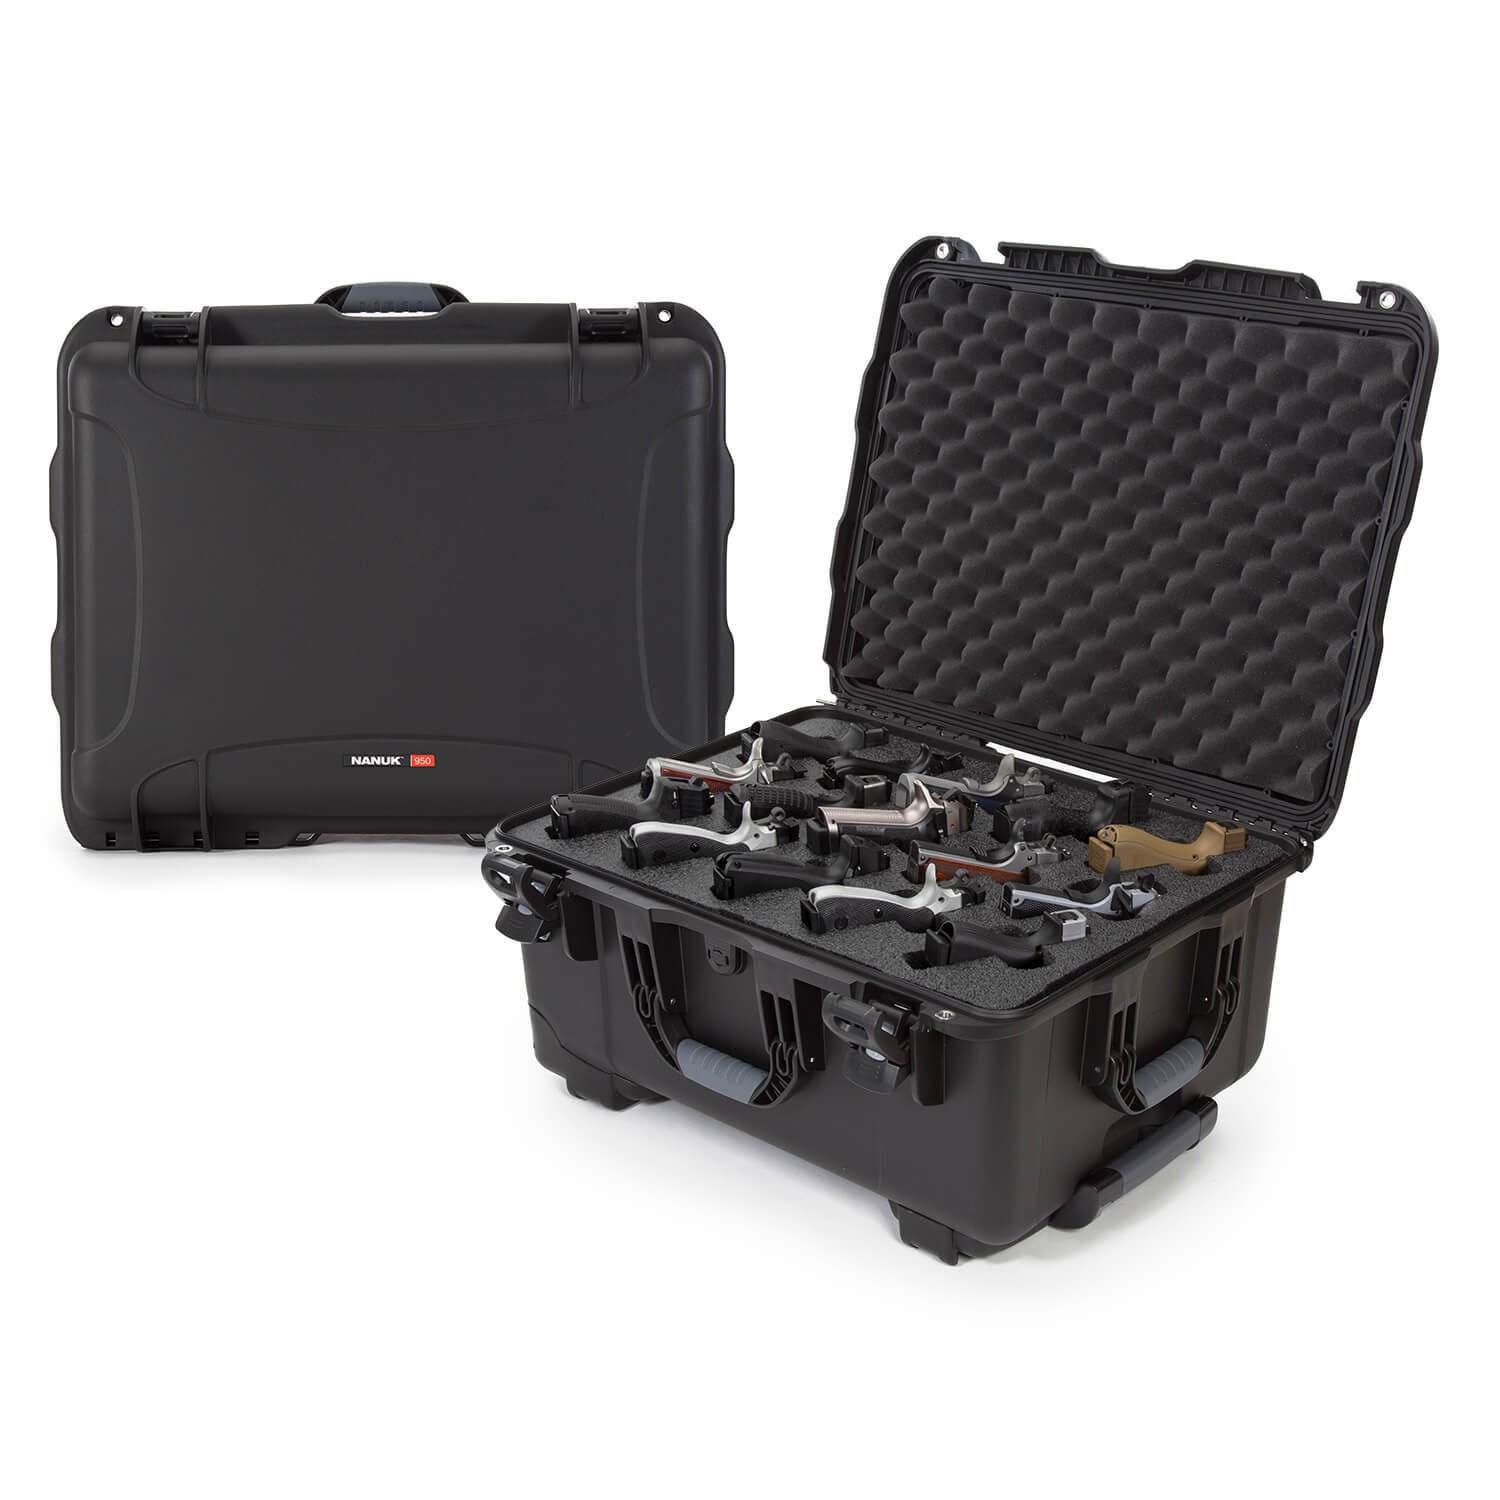 NANUK 950 15 UP Pistol Case | Waterproof, Dustproof, Indestructible and Lifetime Guaranteed [collection_title]